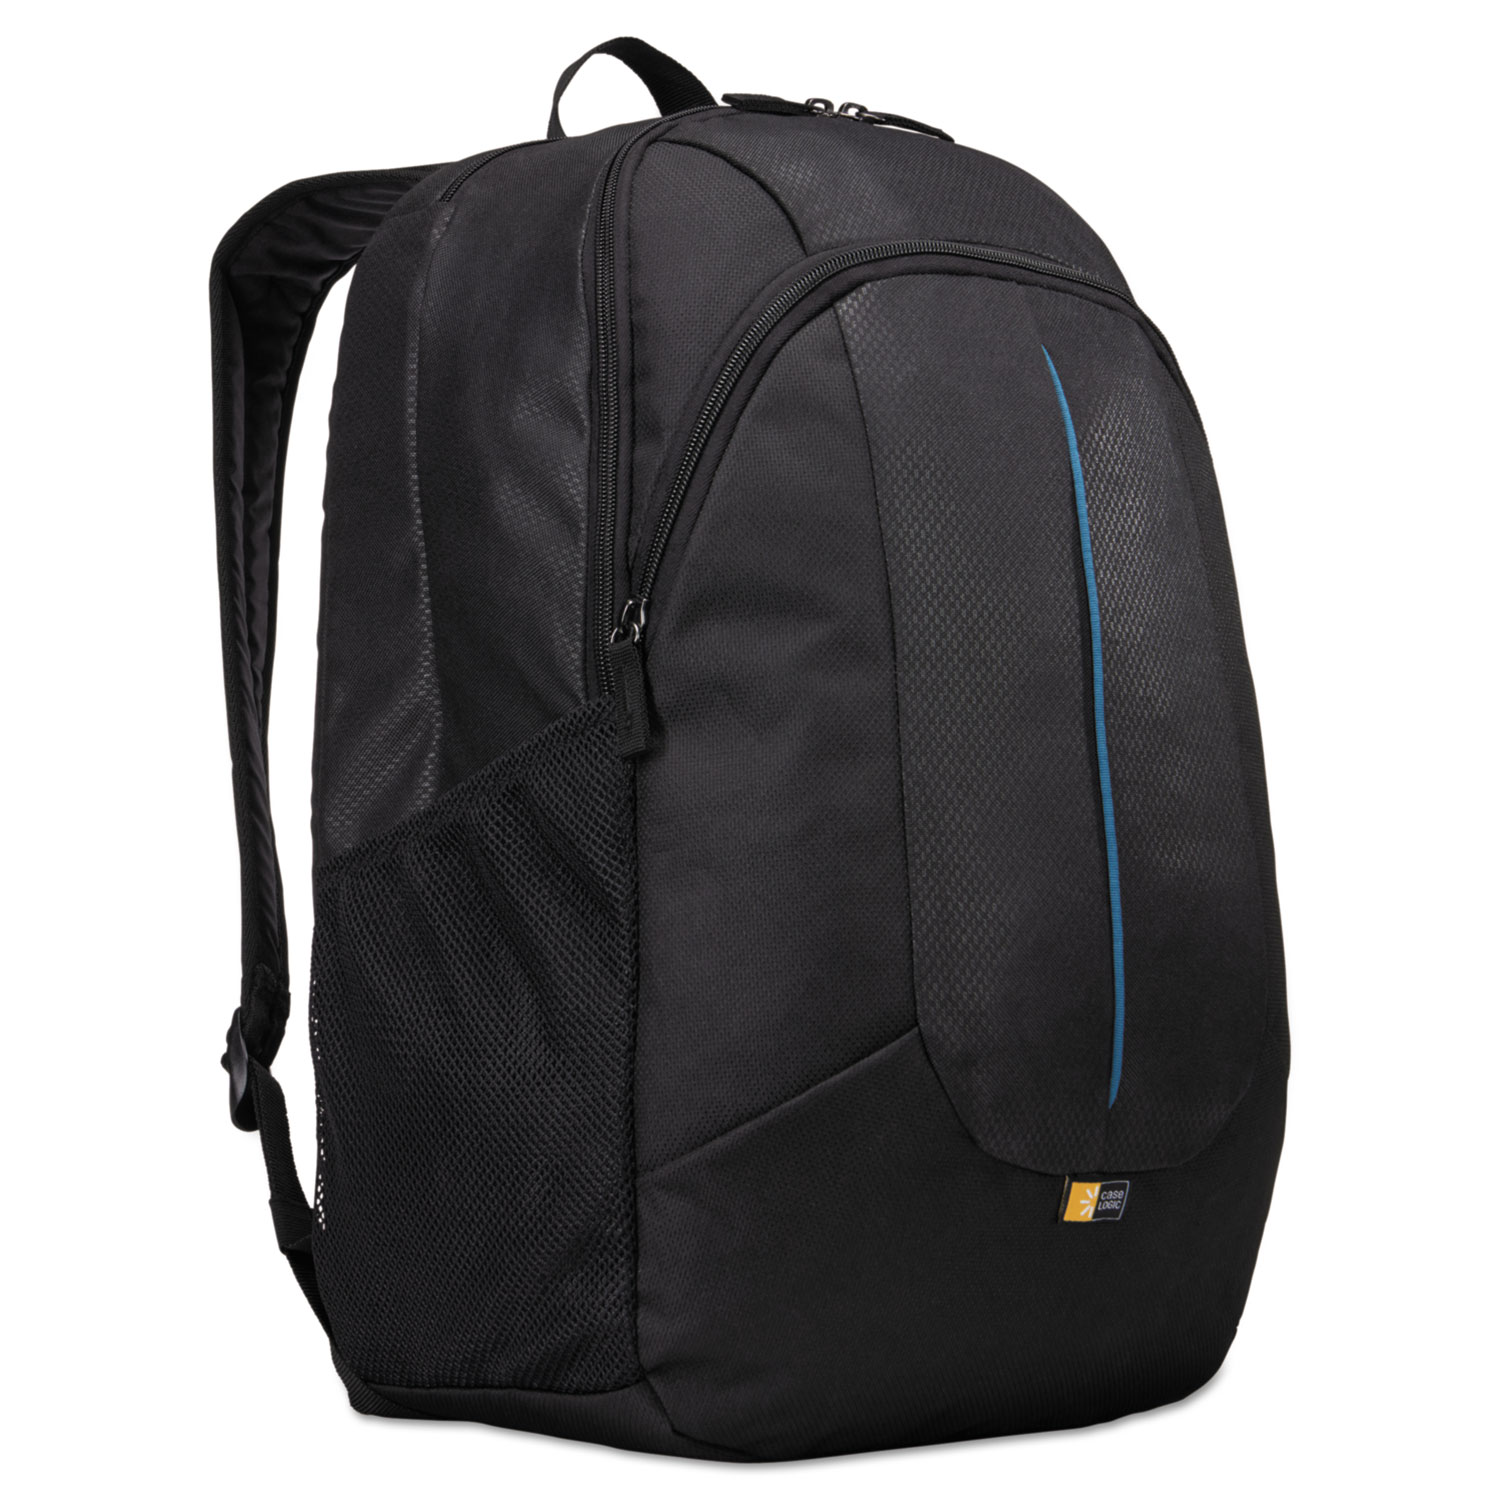 Prevailer 17 Laptop Backpack, 12 1/2 x 12 1/4 x 18, Black with Blue Accent